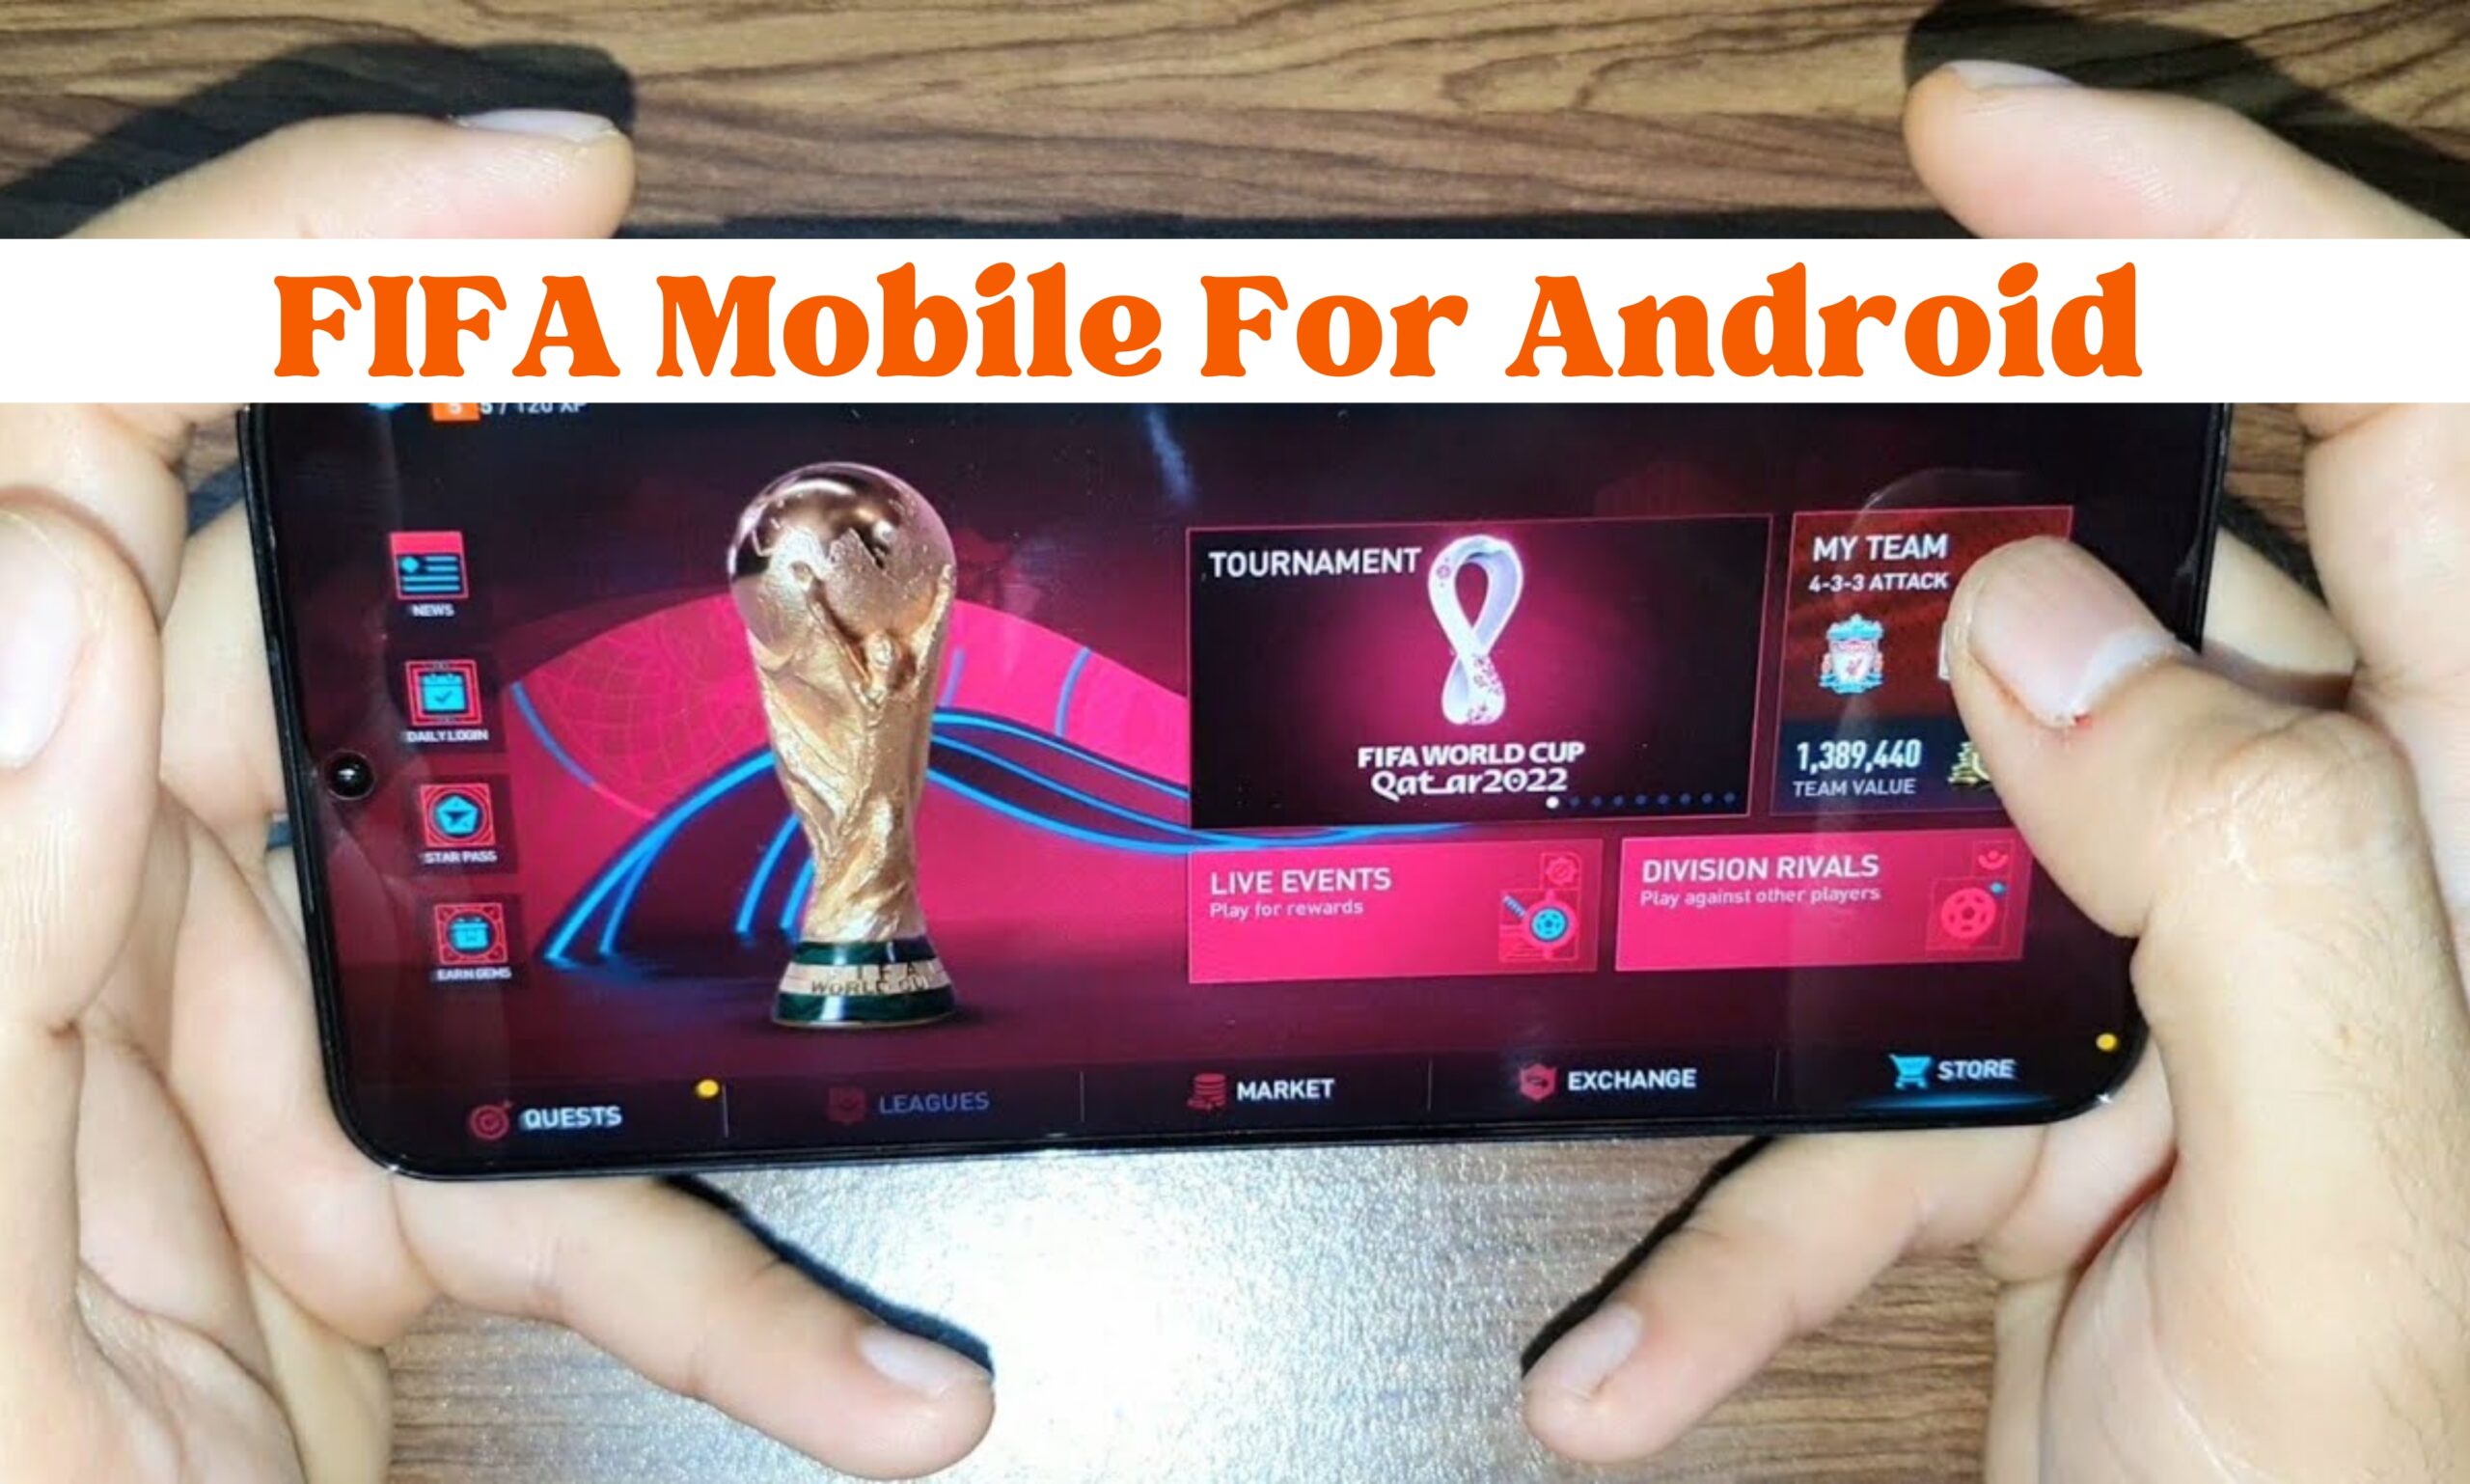 FIFA Mobile For Android